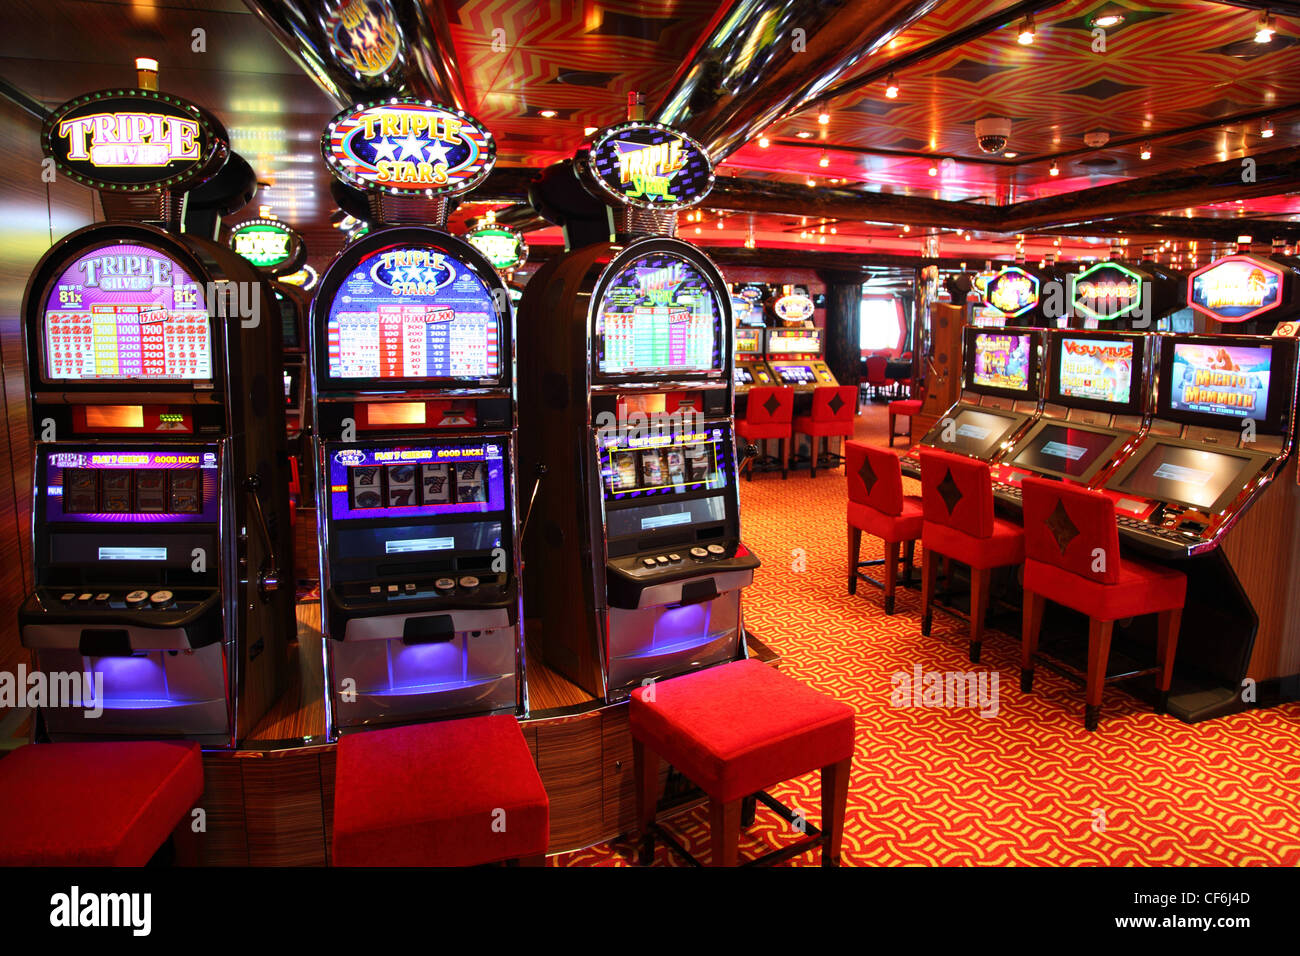 PERSIAN GULF - APRIL 14: Slot machines in play room, April 14, 2010 in Persian. Slot machines - most popular gambling. Stock Photo